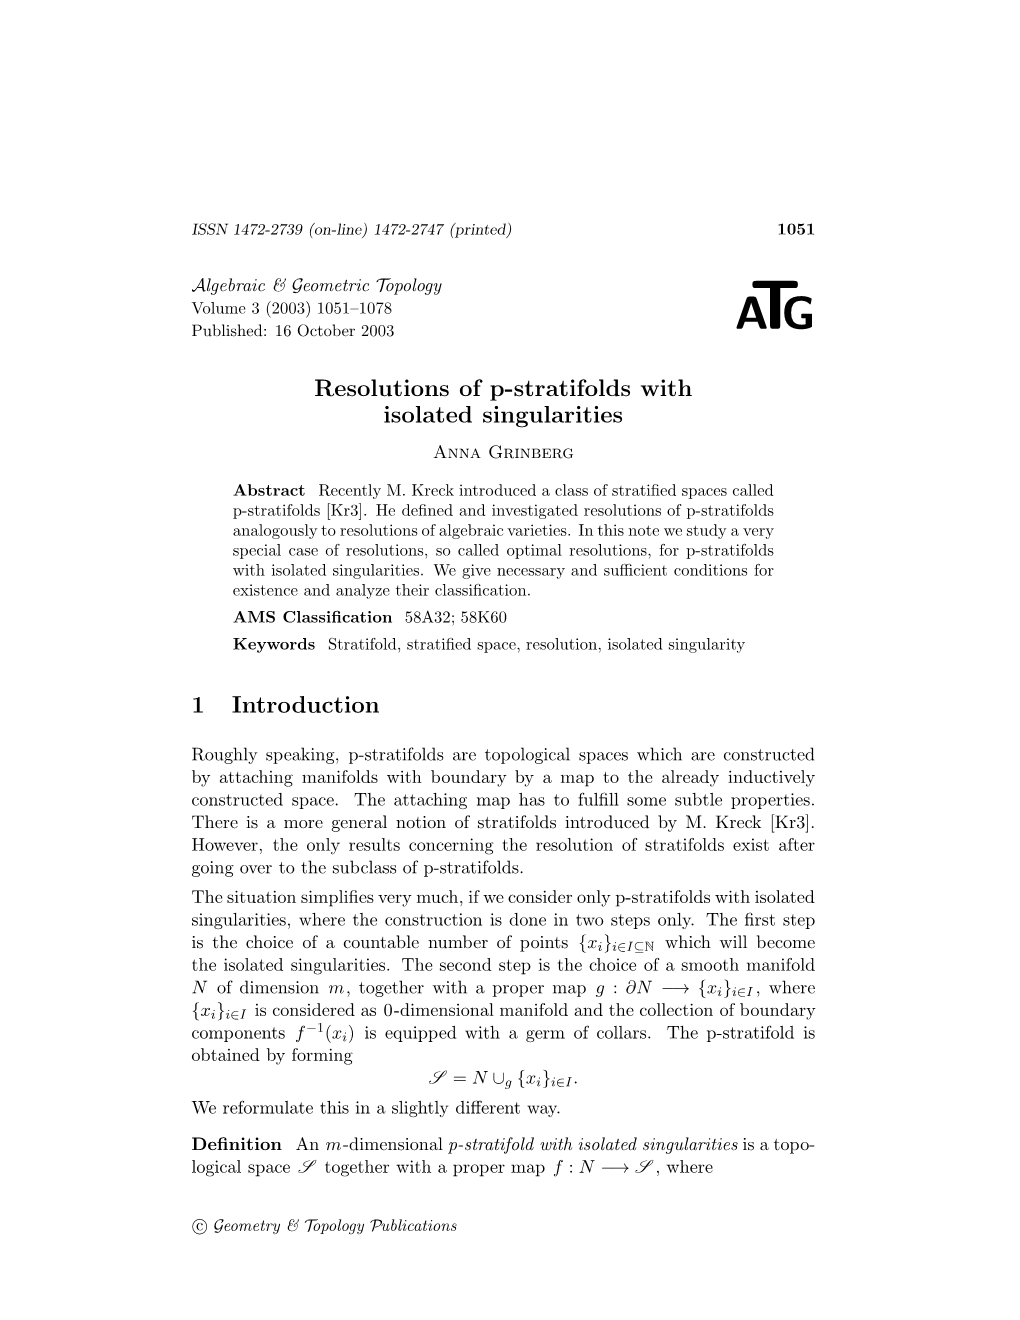 Resolutions of P-Stratifolds with Isolated Singularities 1053